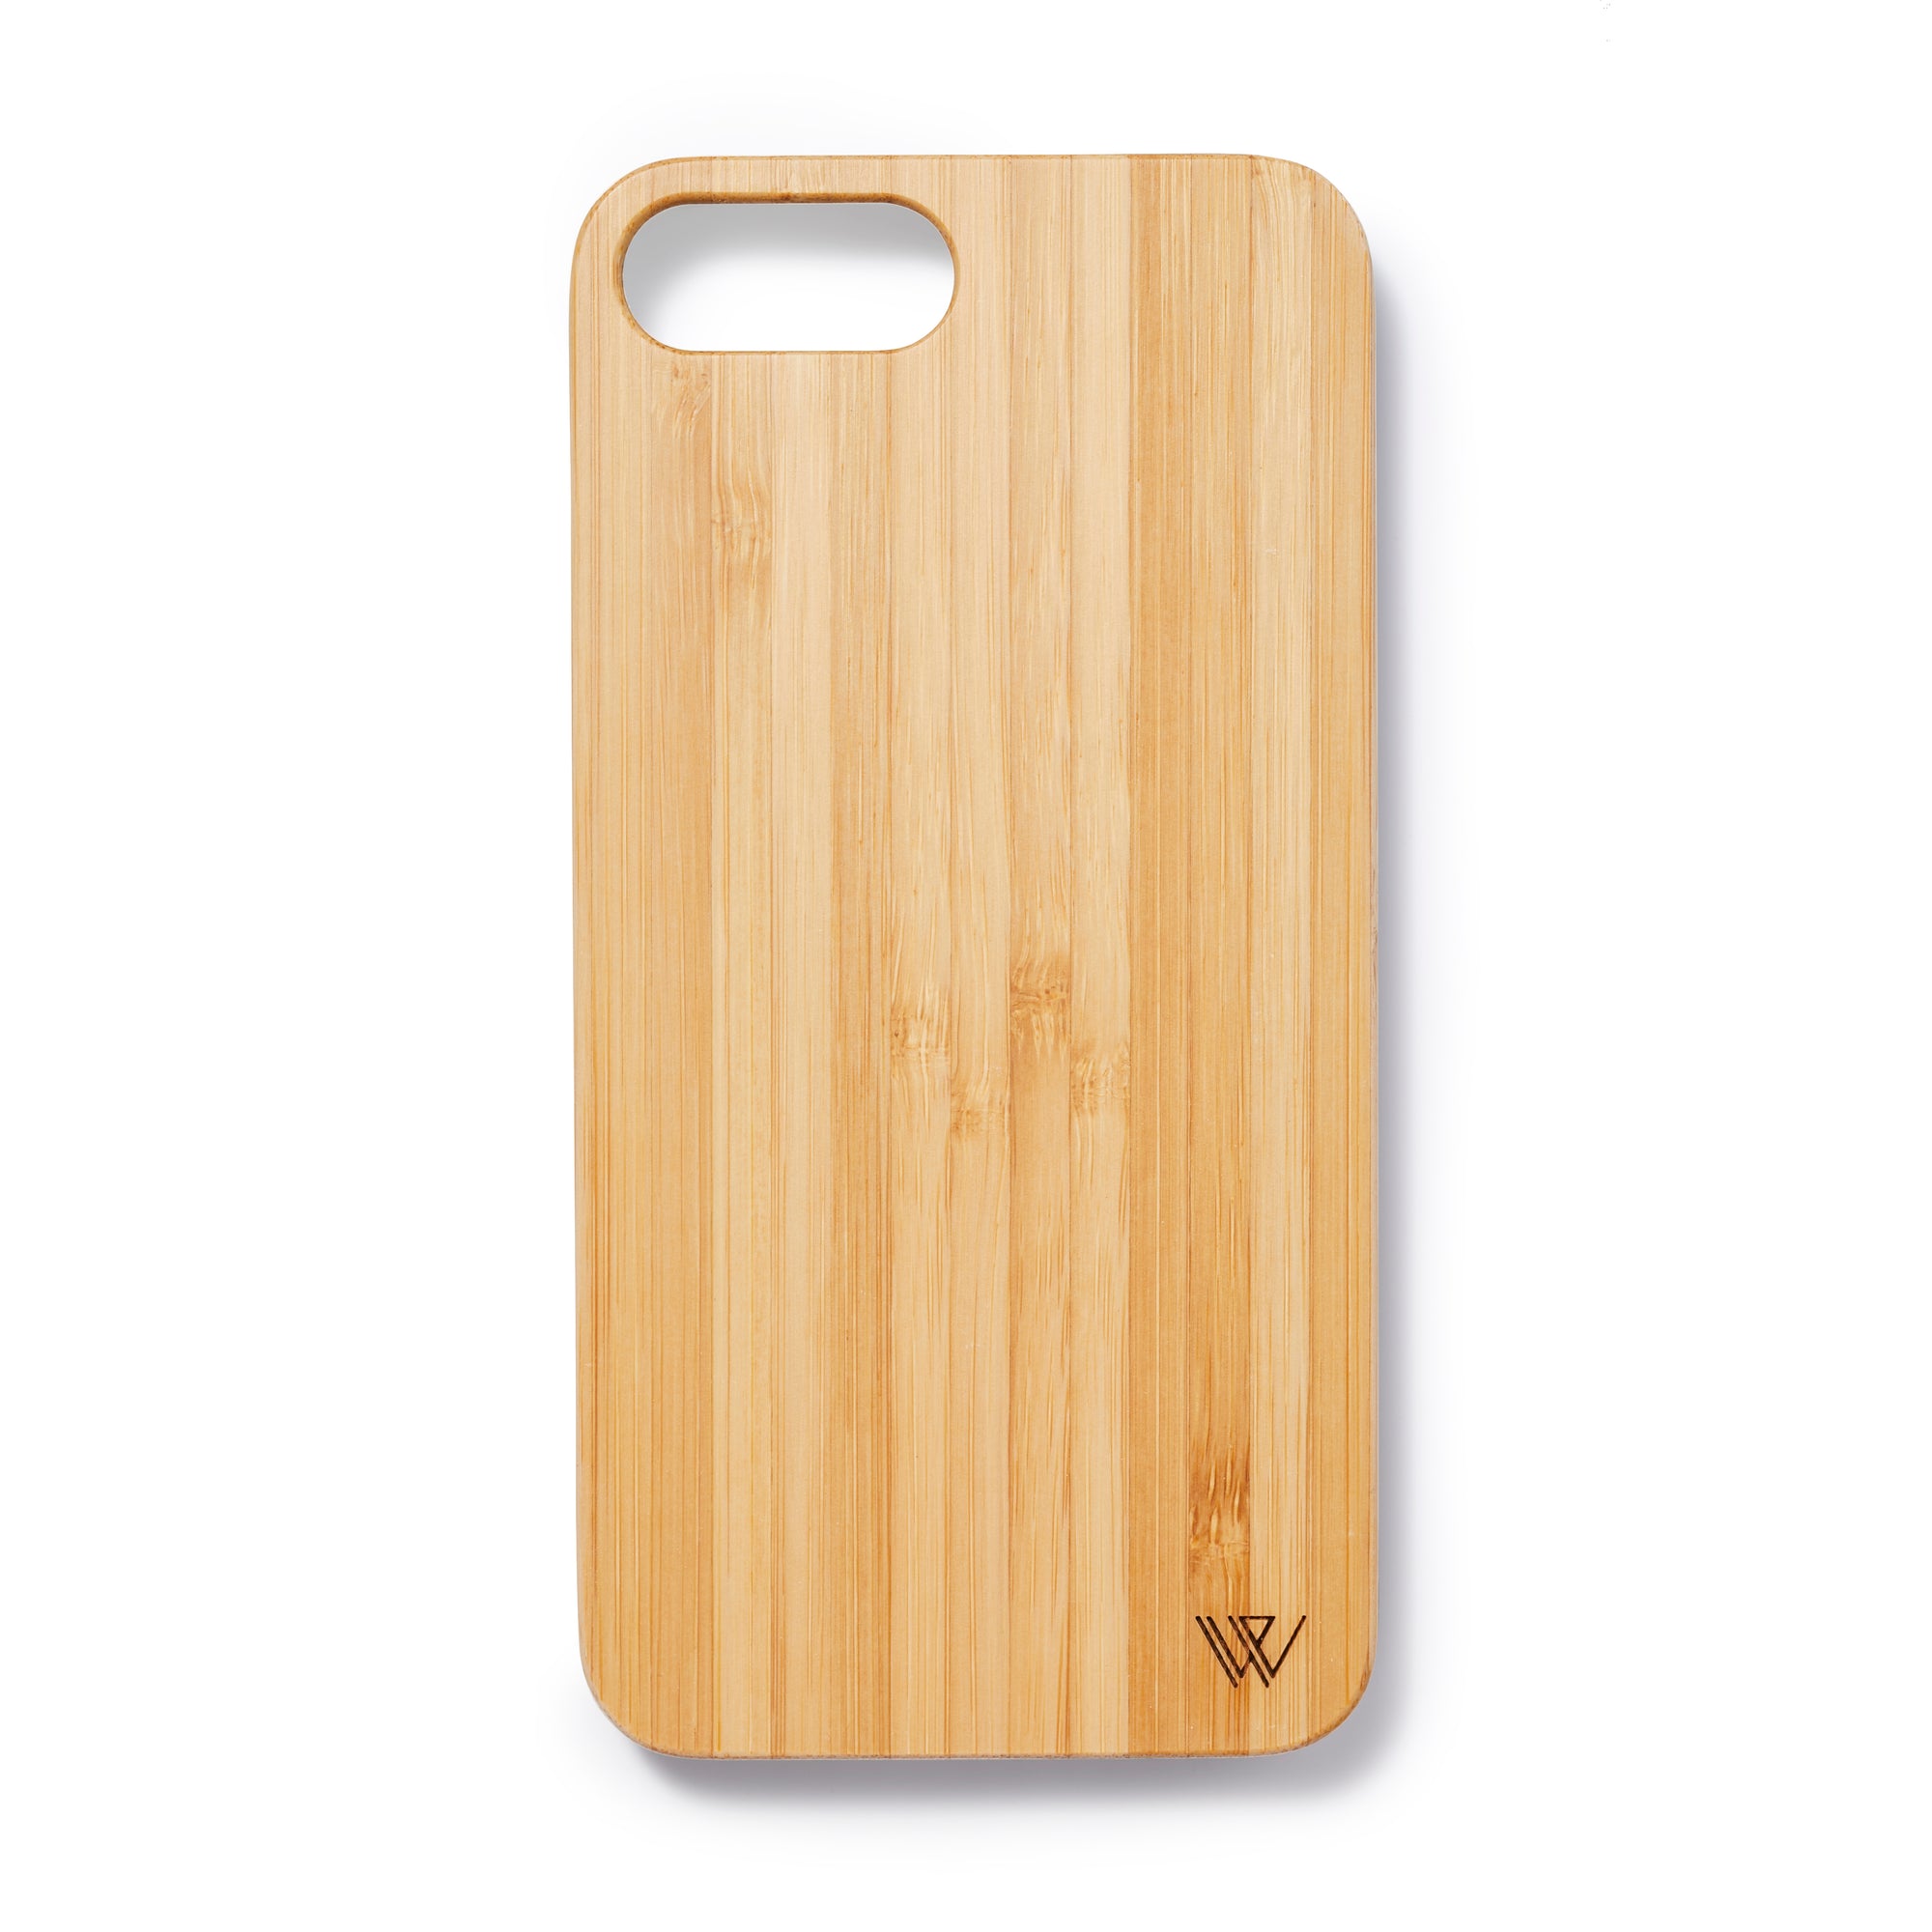 Wooden Iphone 6,7 and 8 plus back case bamboo - Woodstylz